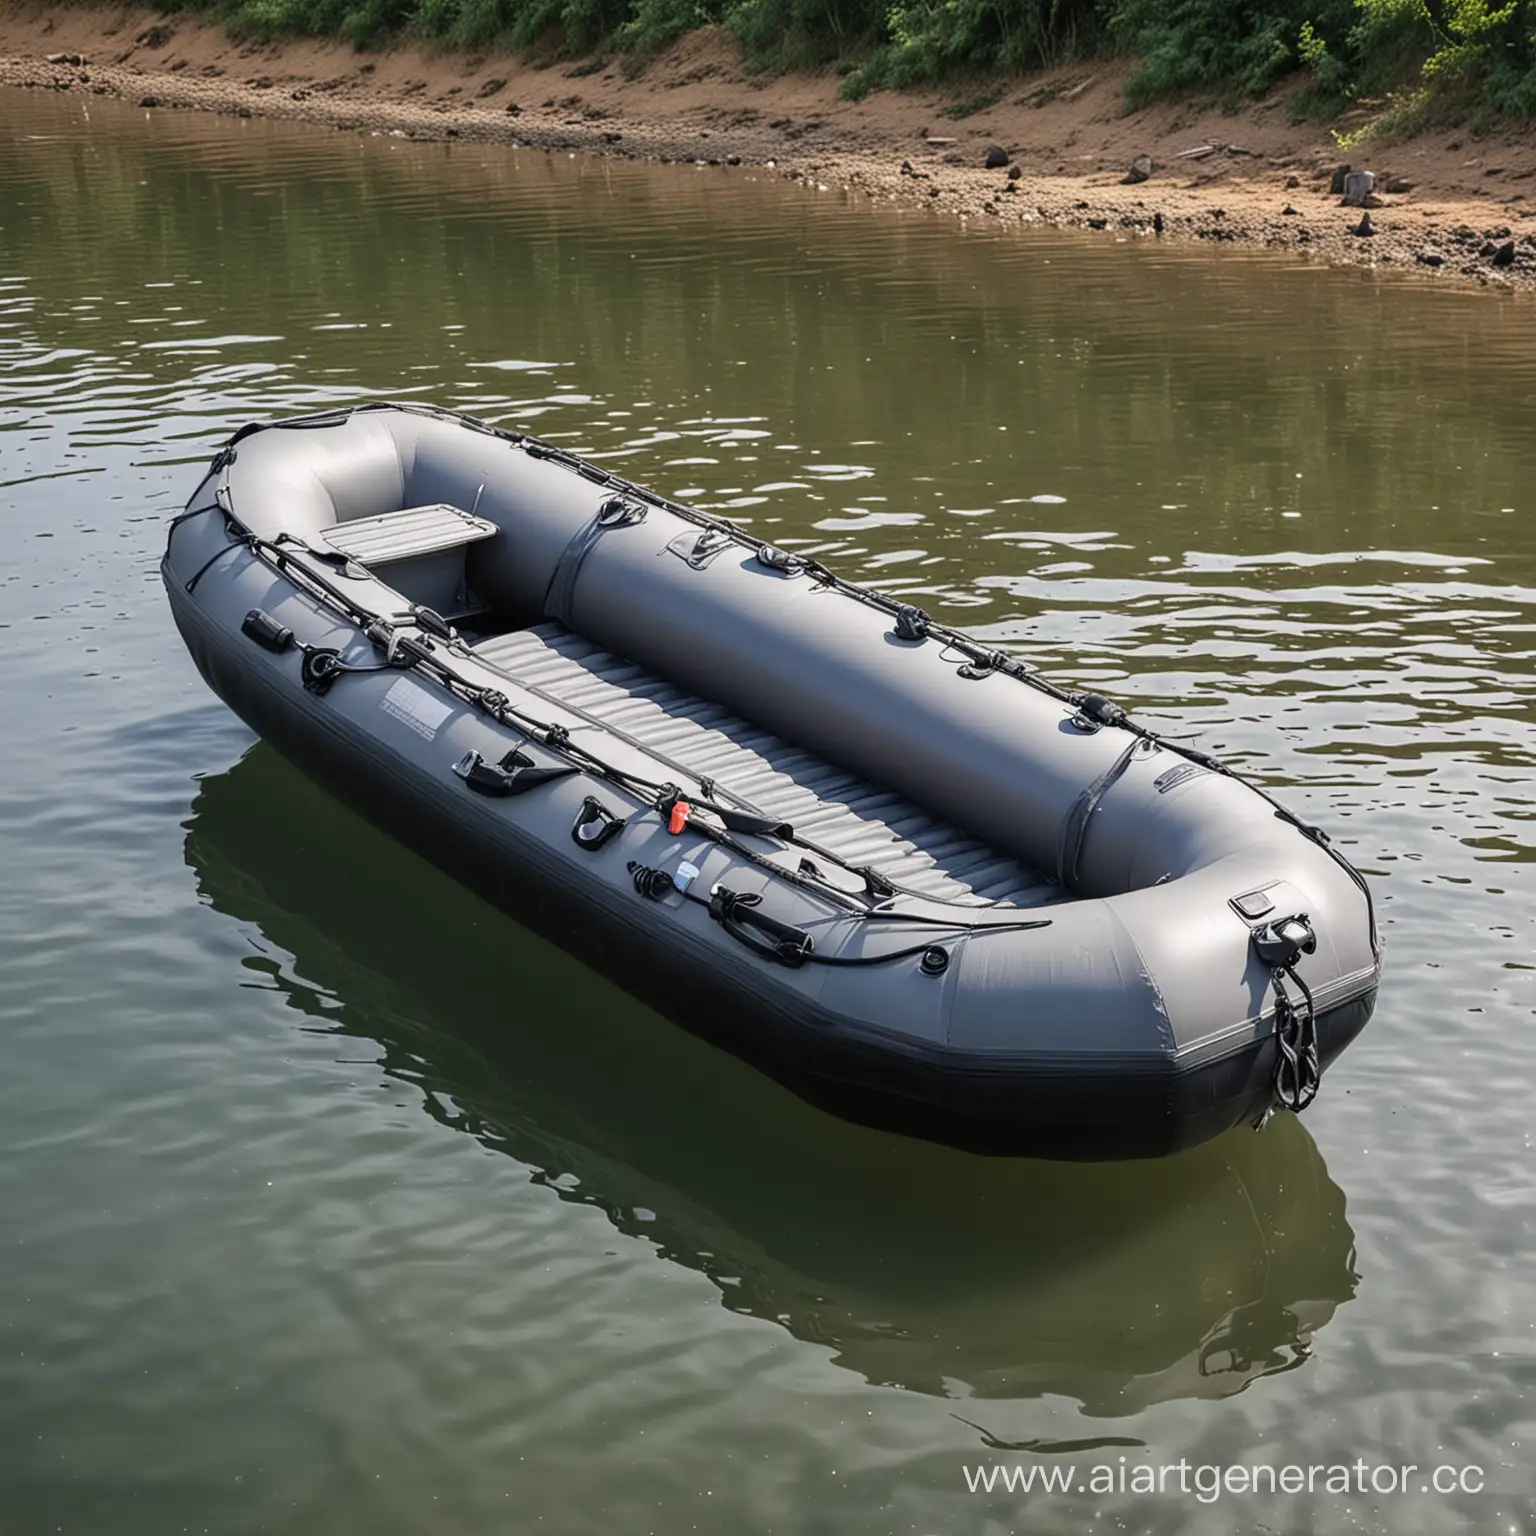 Man-Scammed-Buying-Inflatable-Boat-Online-Criminal-Case-Initiated